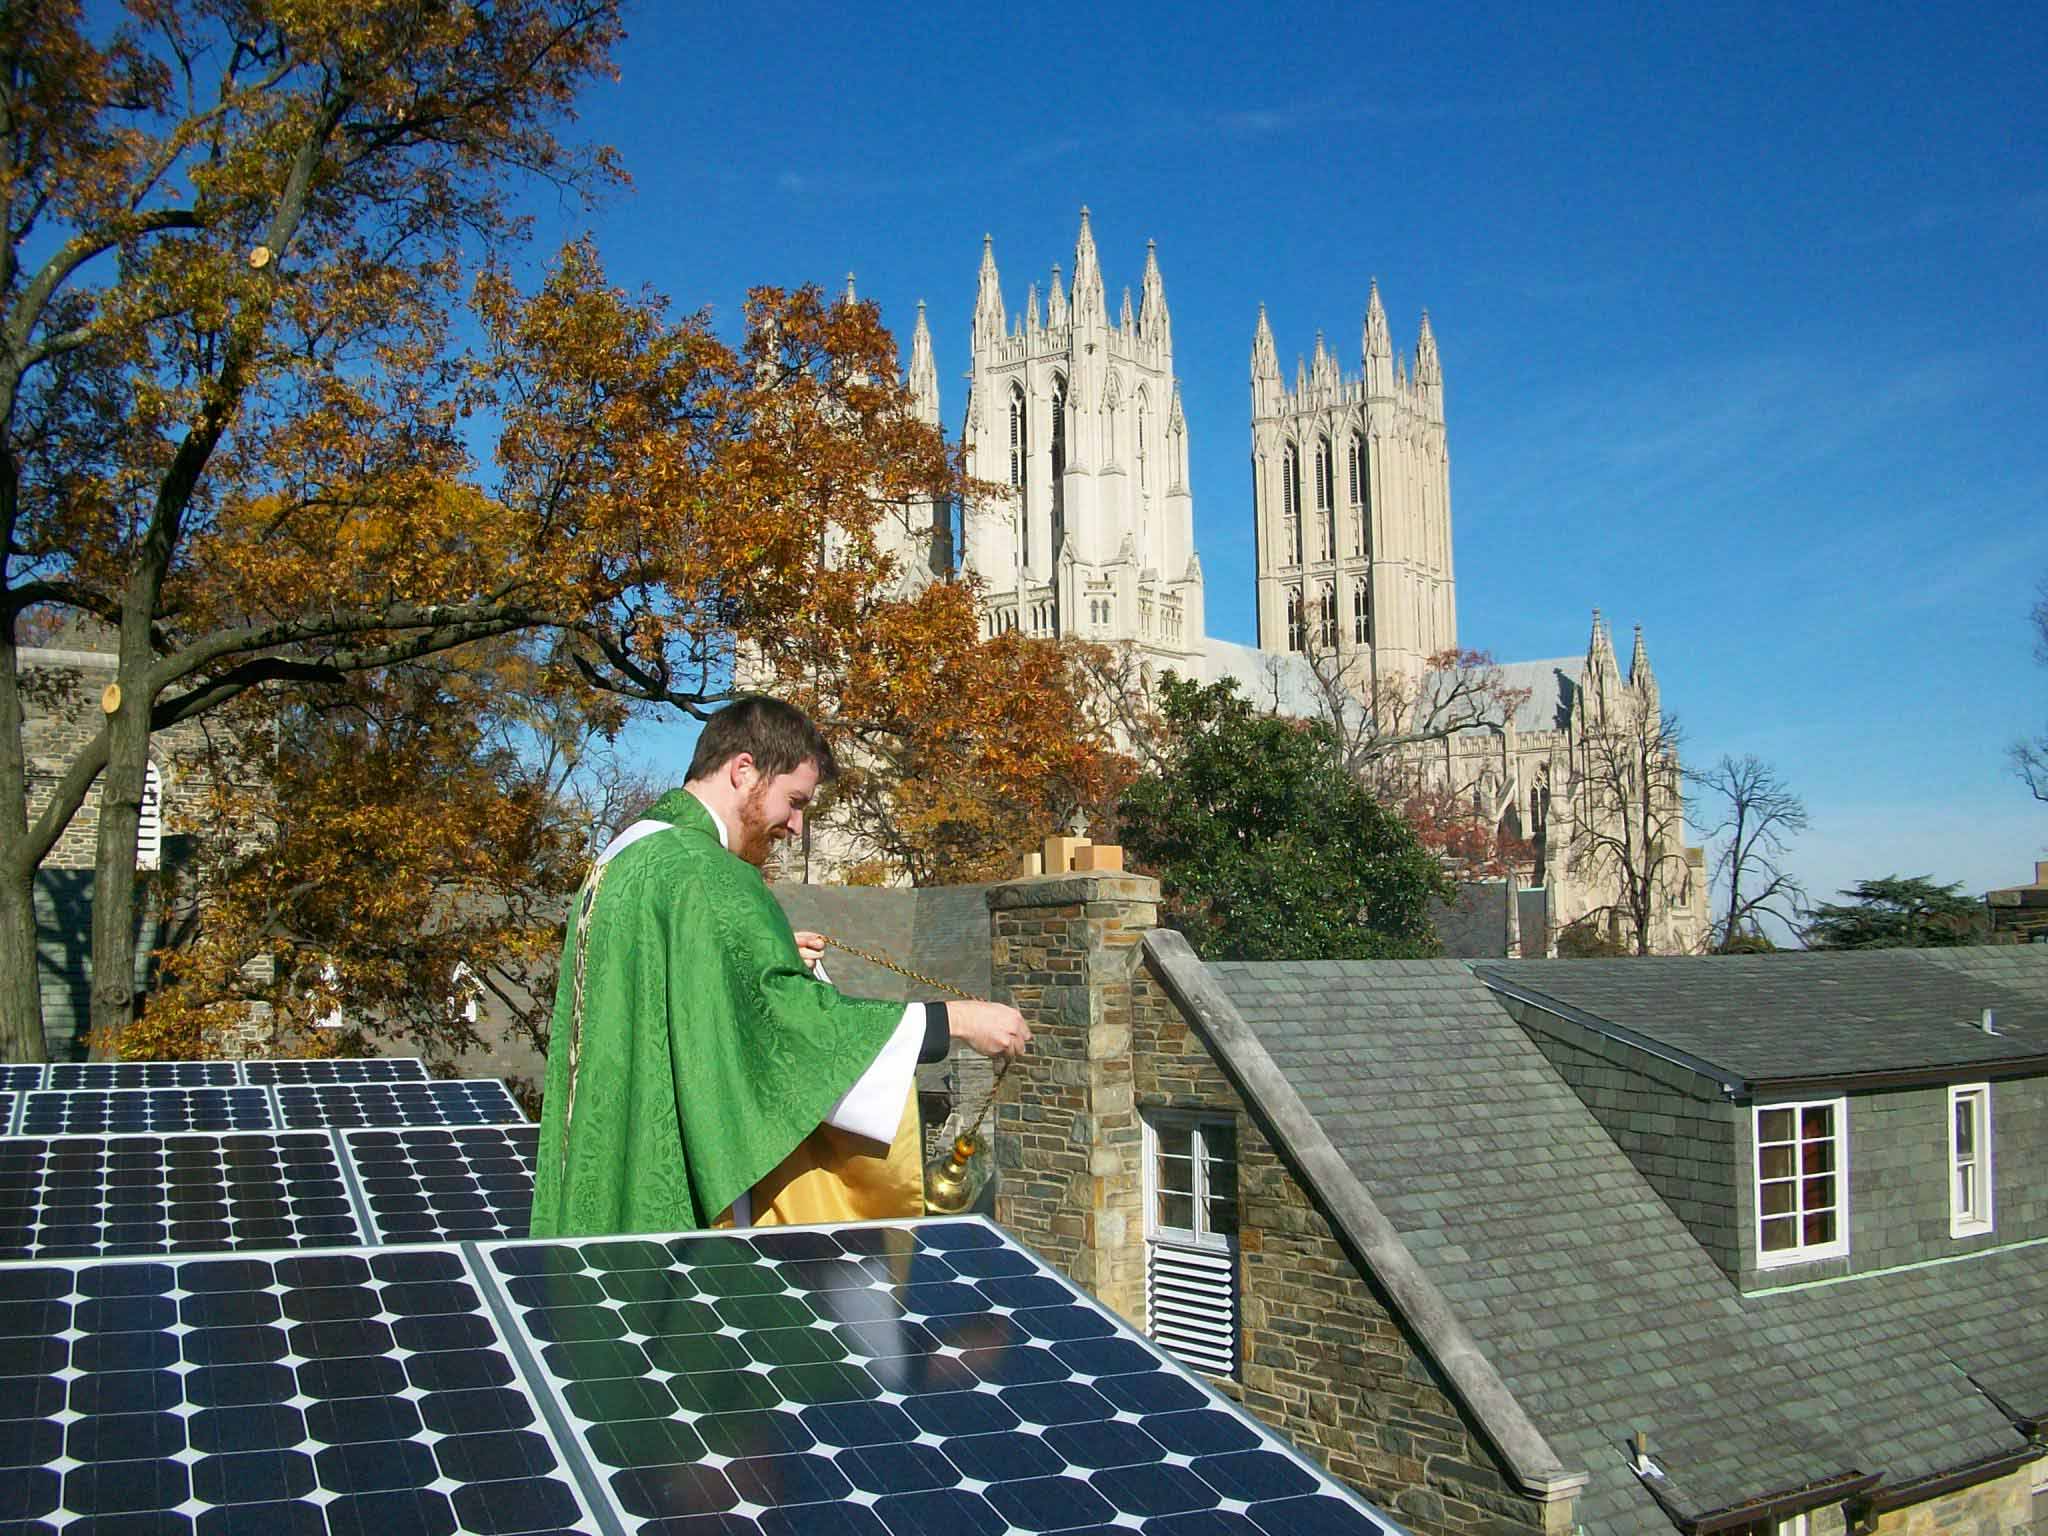 An Episcopal priest burns incense over a row of solar panels. A large cathedral is in the background.